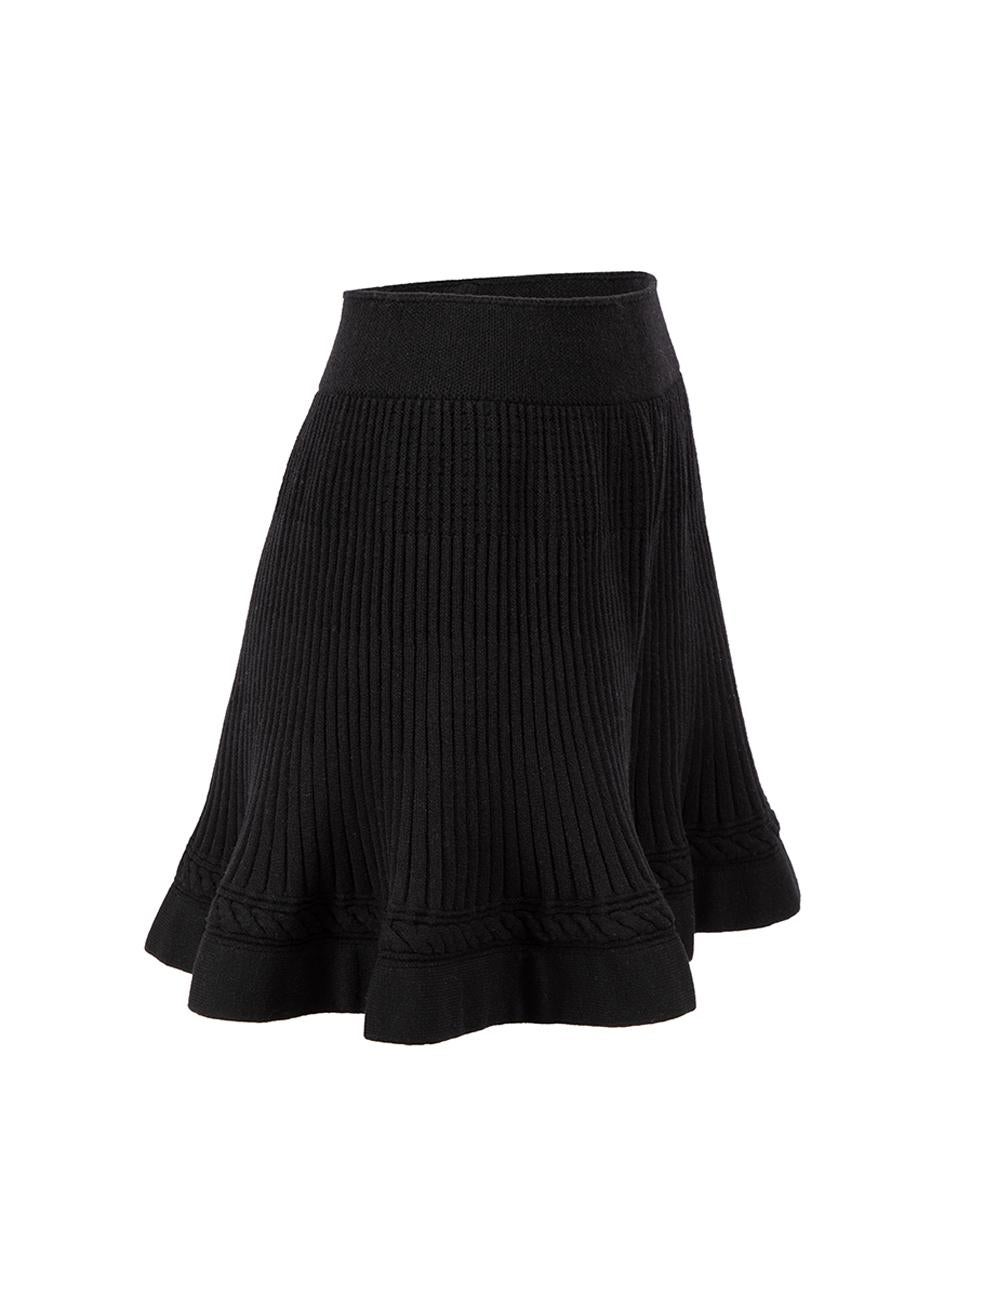 CONDITION is Very good. Minimal wear to skirt is evident. Minimal pilling to overall fabric on skirt and minor discolouration on the lining of this used Alaïa designer resale item.



Details


Black

Wool

Circle